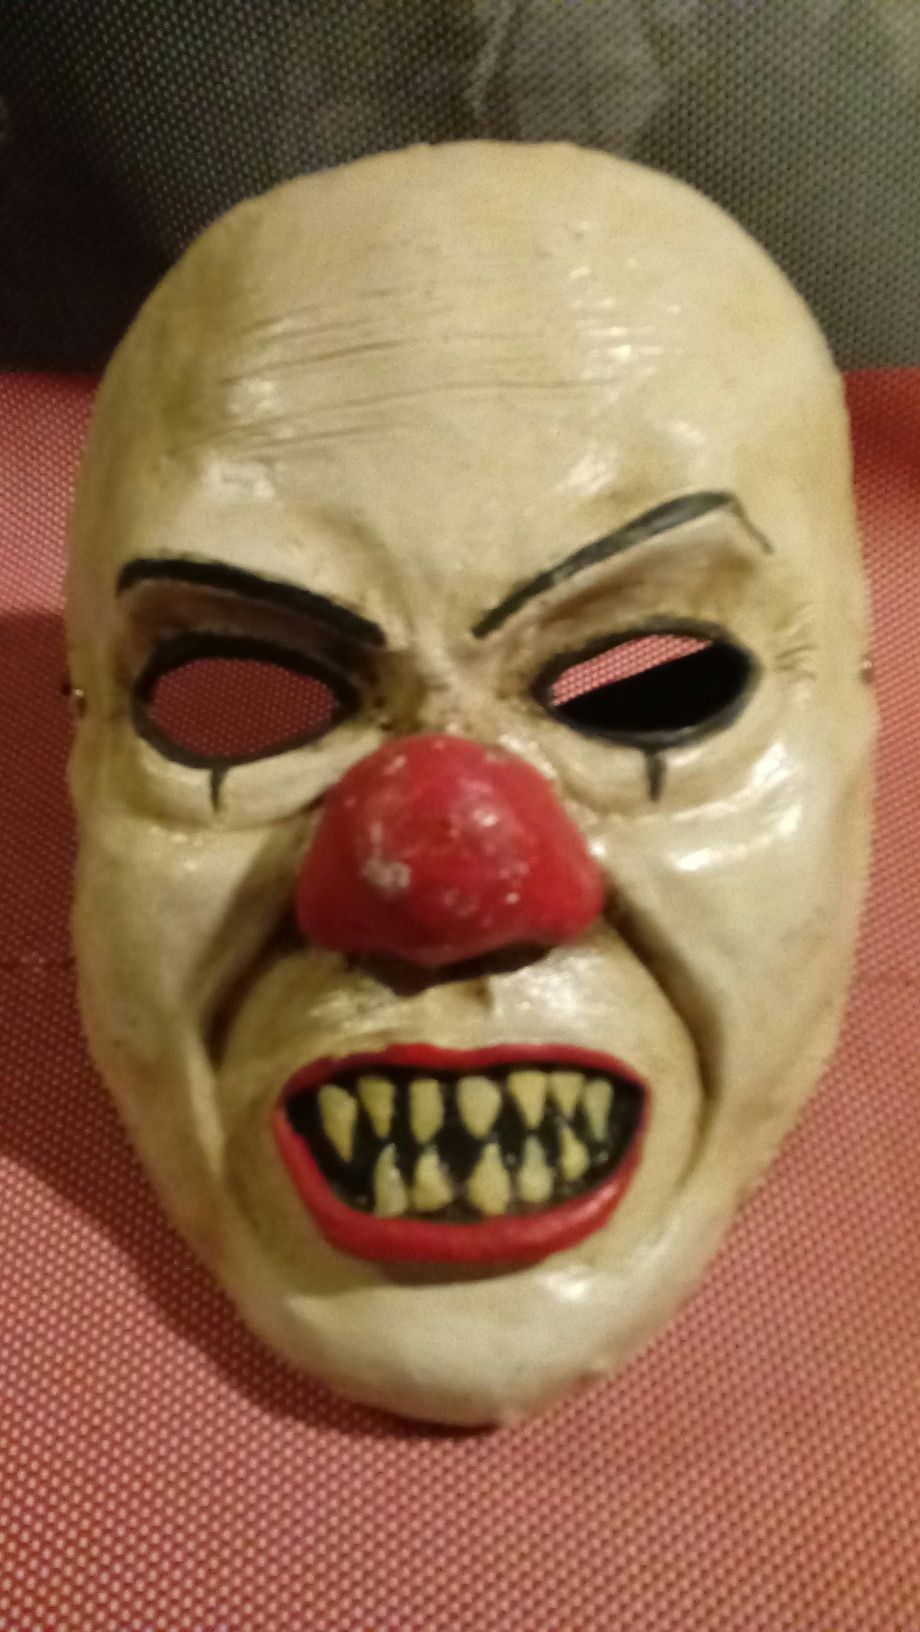 Collectable Mask